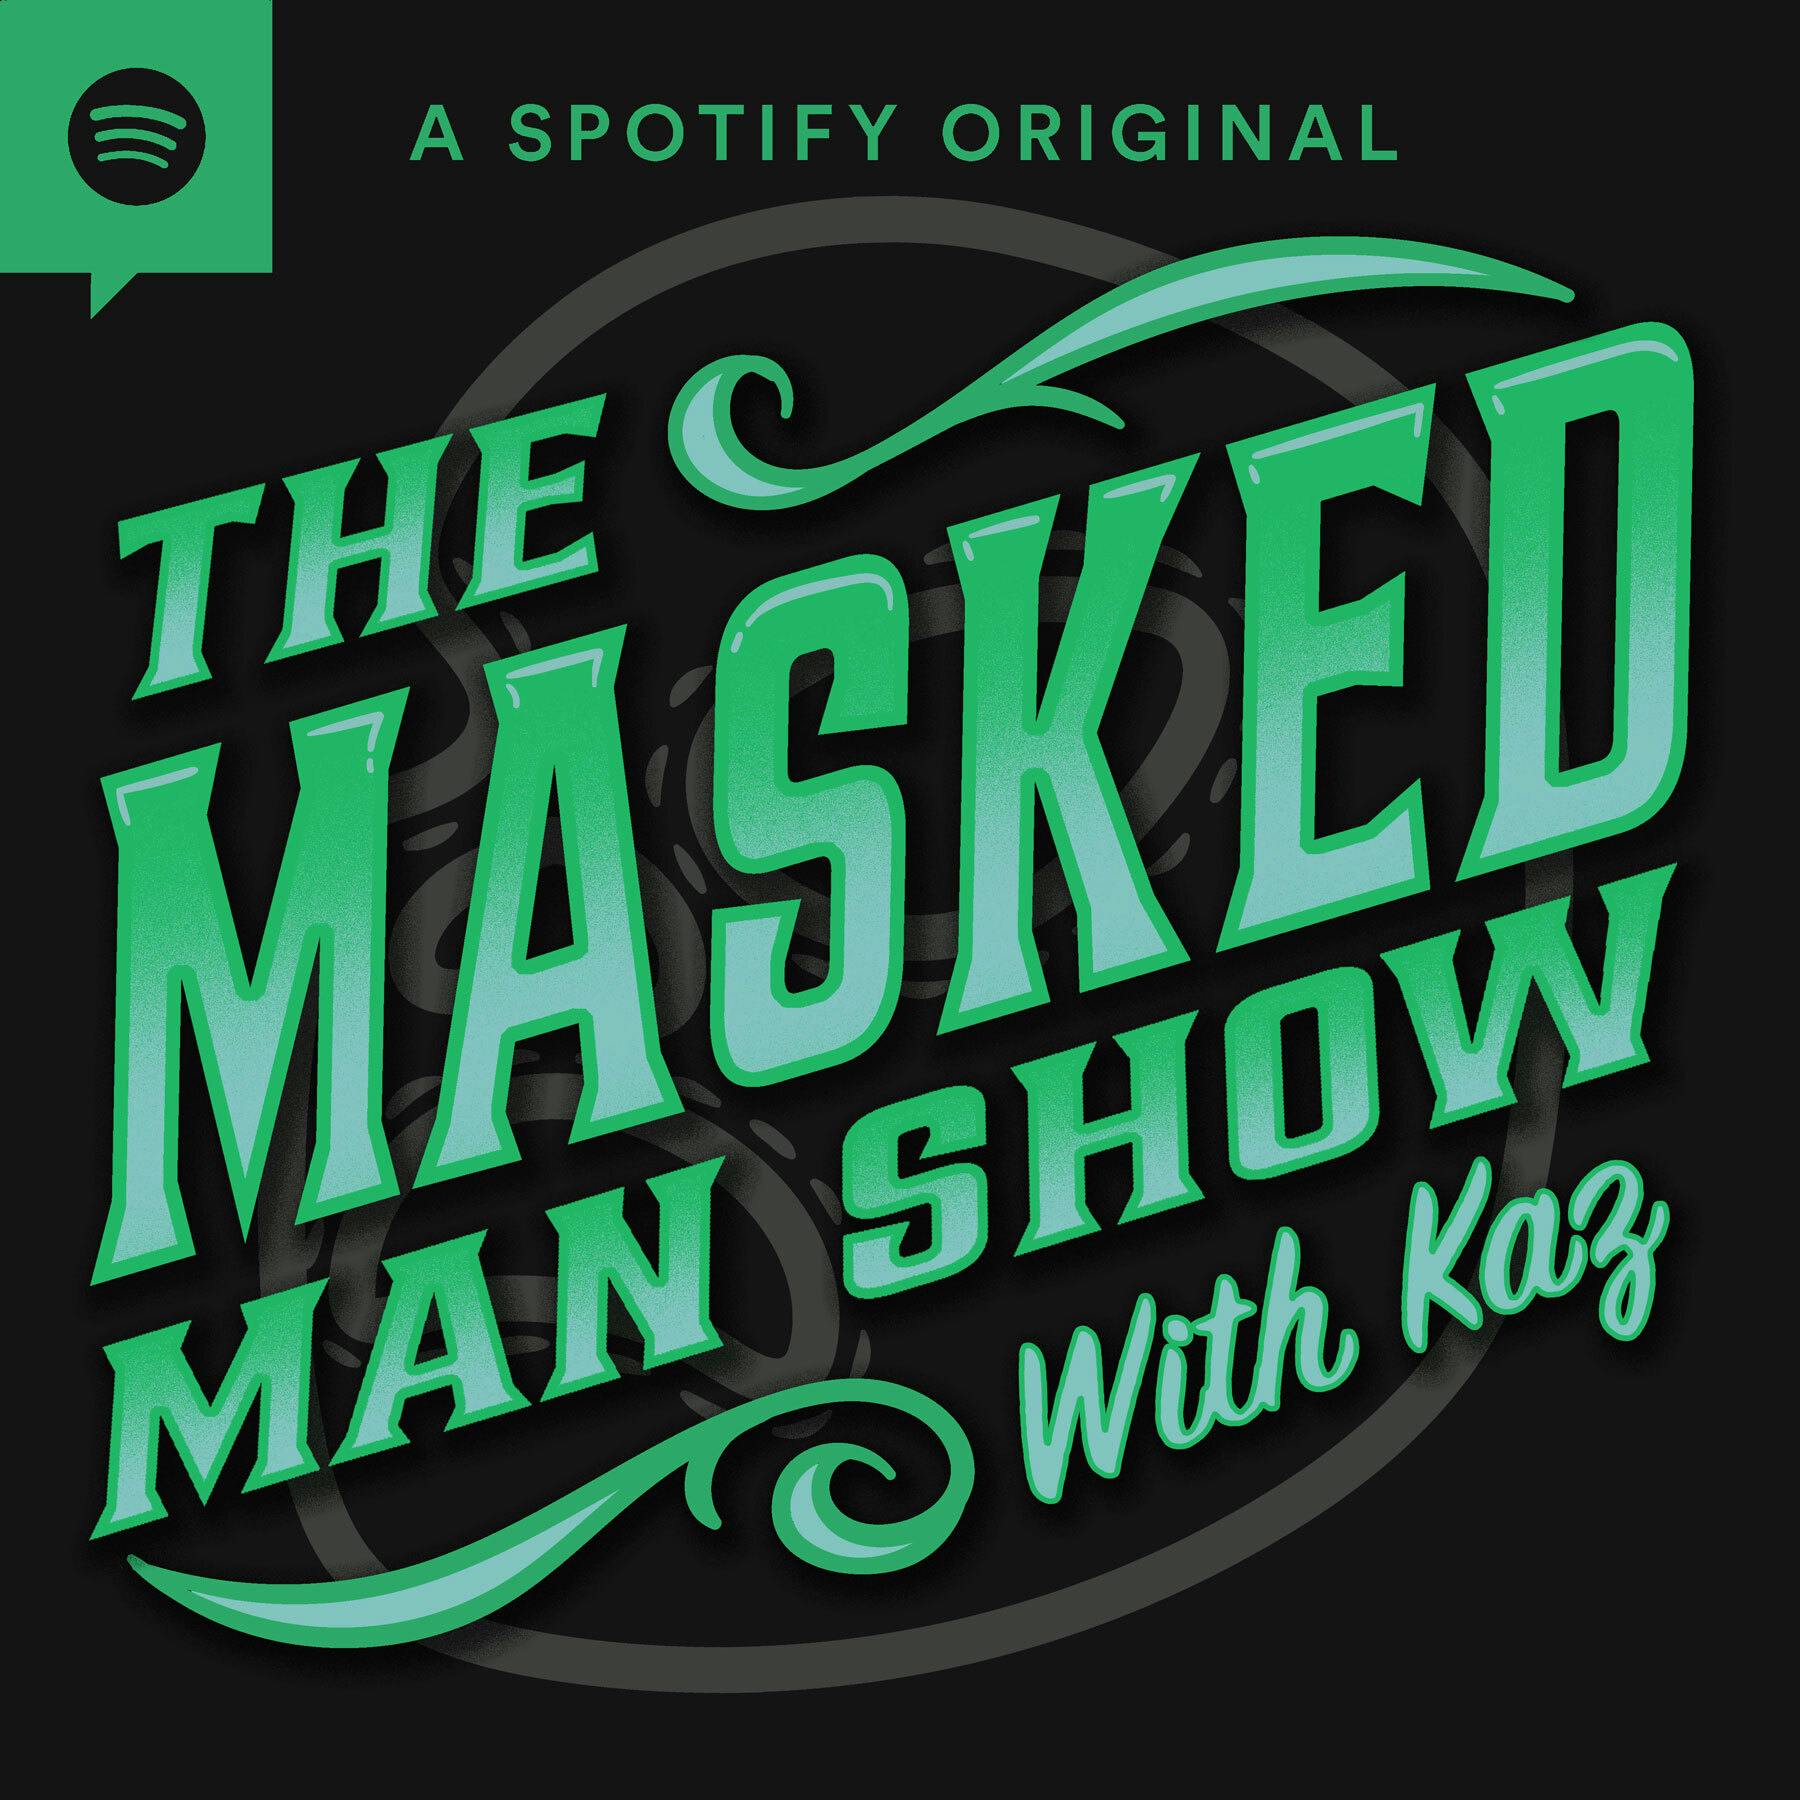 WWE and UFC Merger Closing Soon | The Masked Man Show